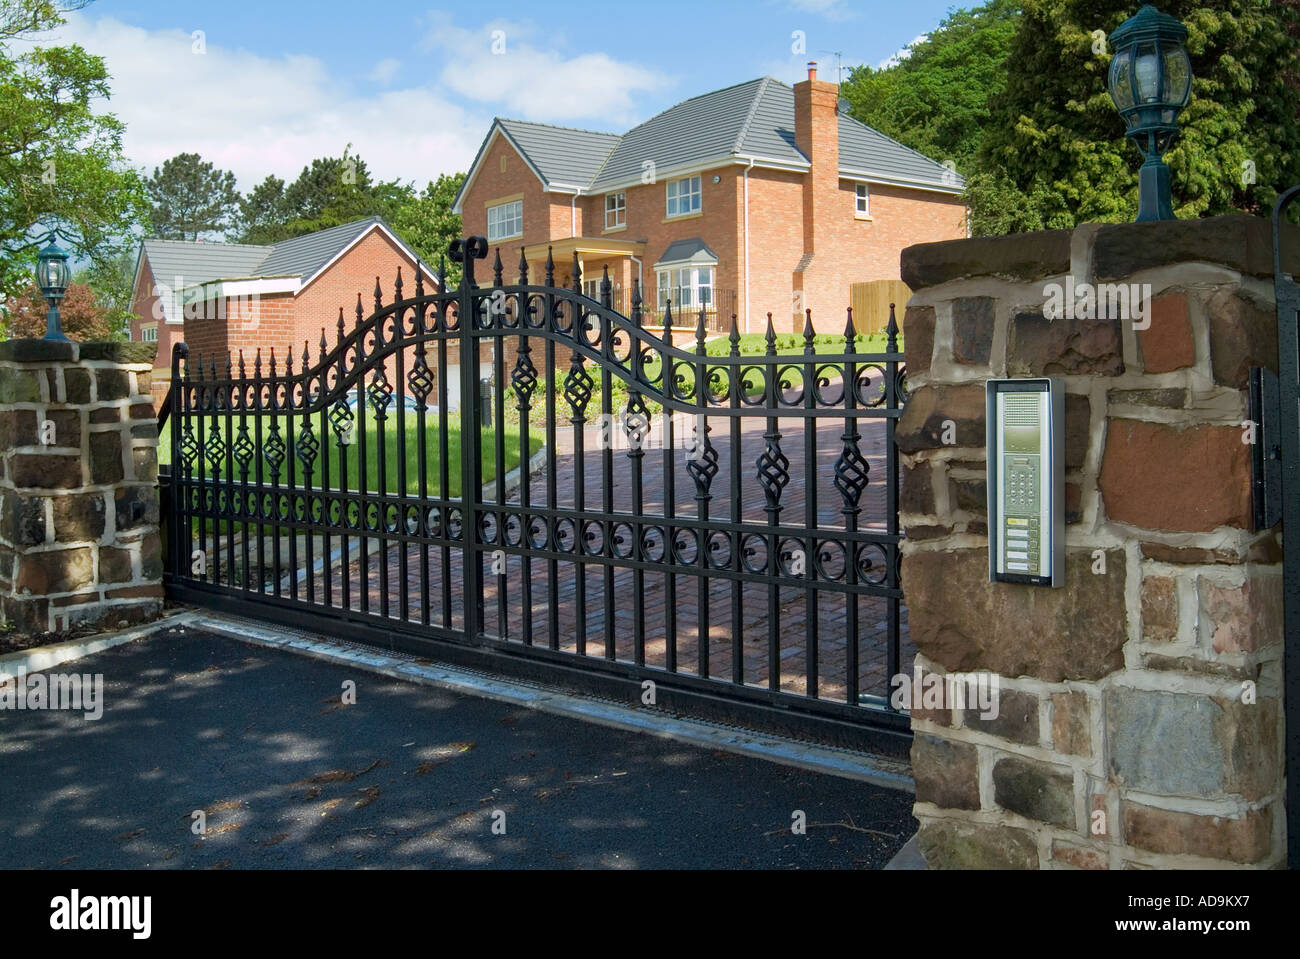 Security entrance electrically operated gate with intercom on a new and prestigious housing development Stock Photo